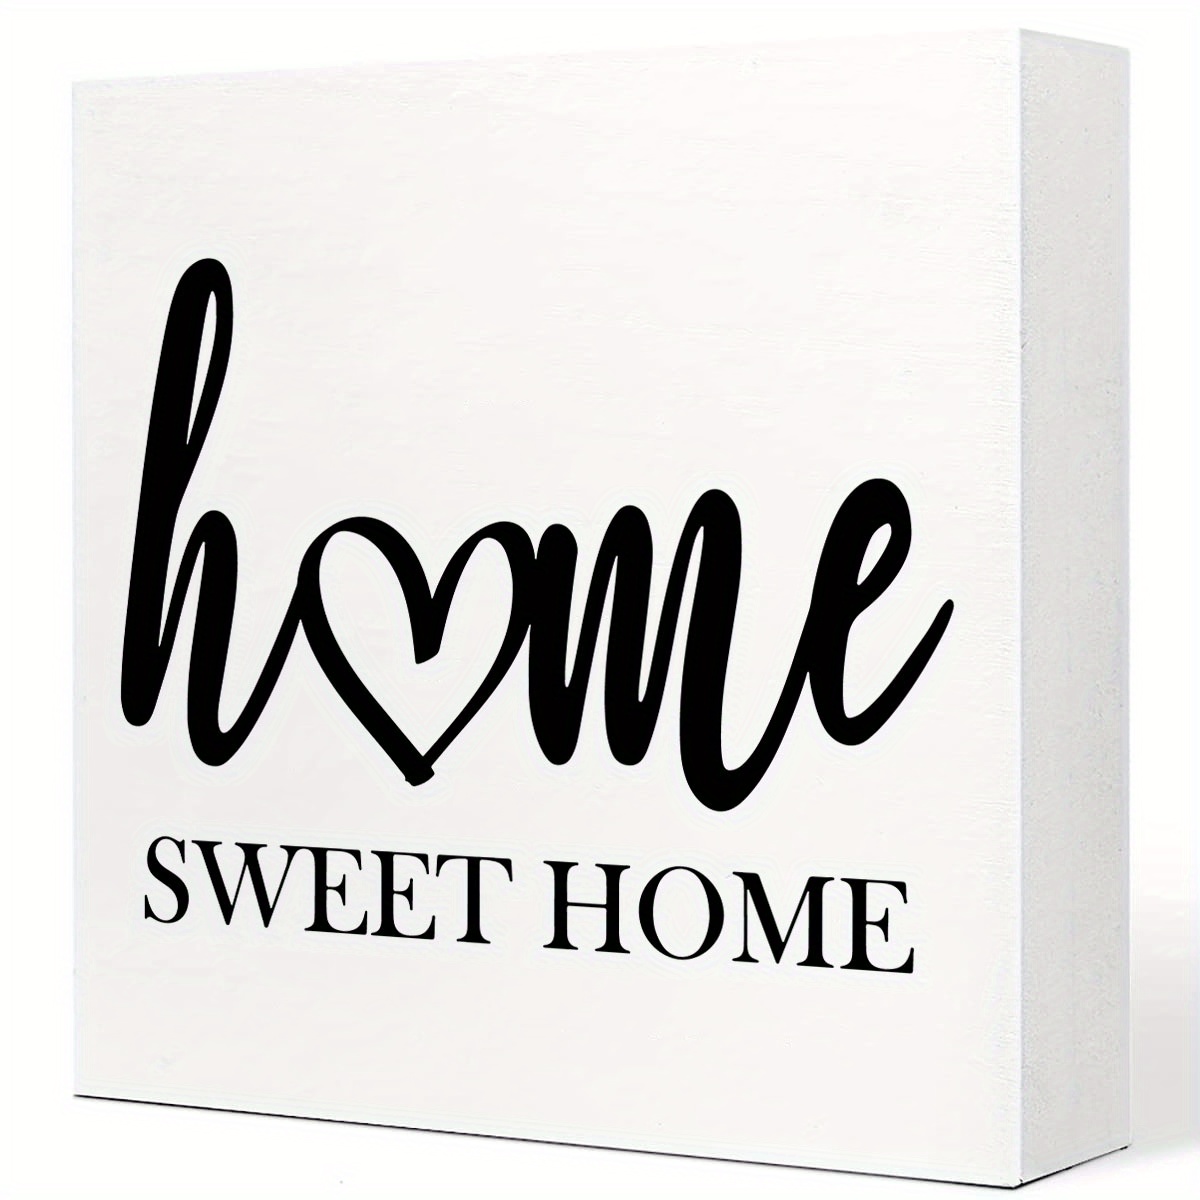 

1pc, Home Is Our Happy Place Wooden Box Sign, Decorative Family Farmhouse Wood Box Sign, Home Bedroom Living Room Decor Rustic Square Desk Sign For Shelf